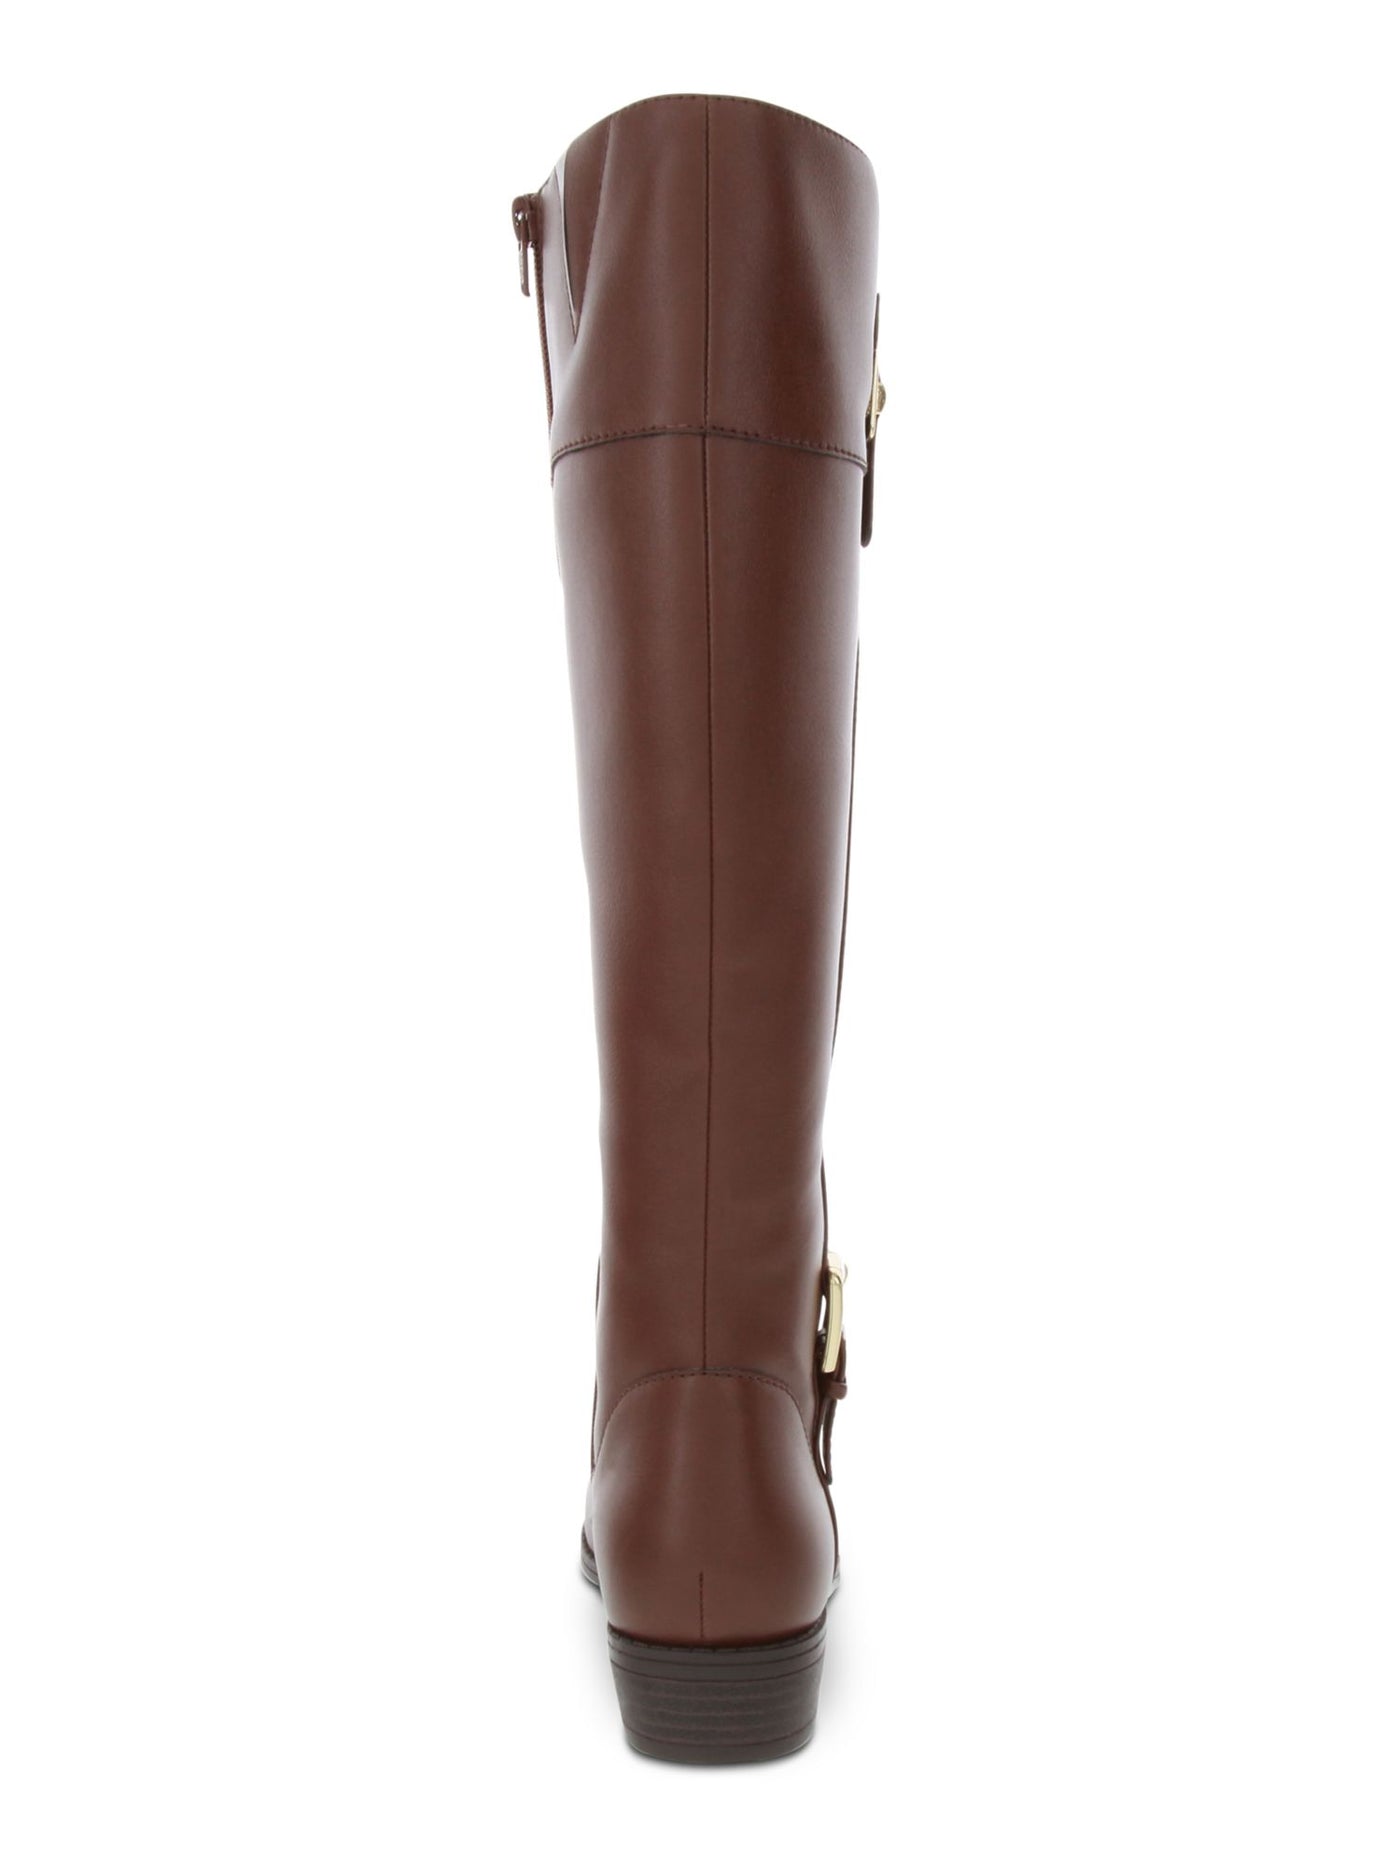 KAREN SCOTT Womens Brown Studded Hardware Cushioned Buckle Accent Deliee2 Round Toe Block Heel Zip-Up Riding Boot 8 W WC